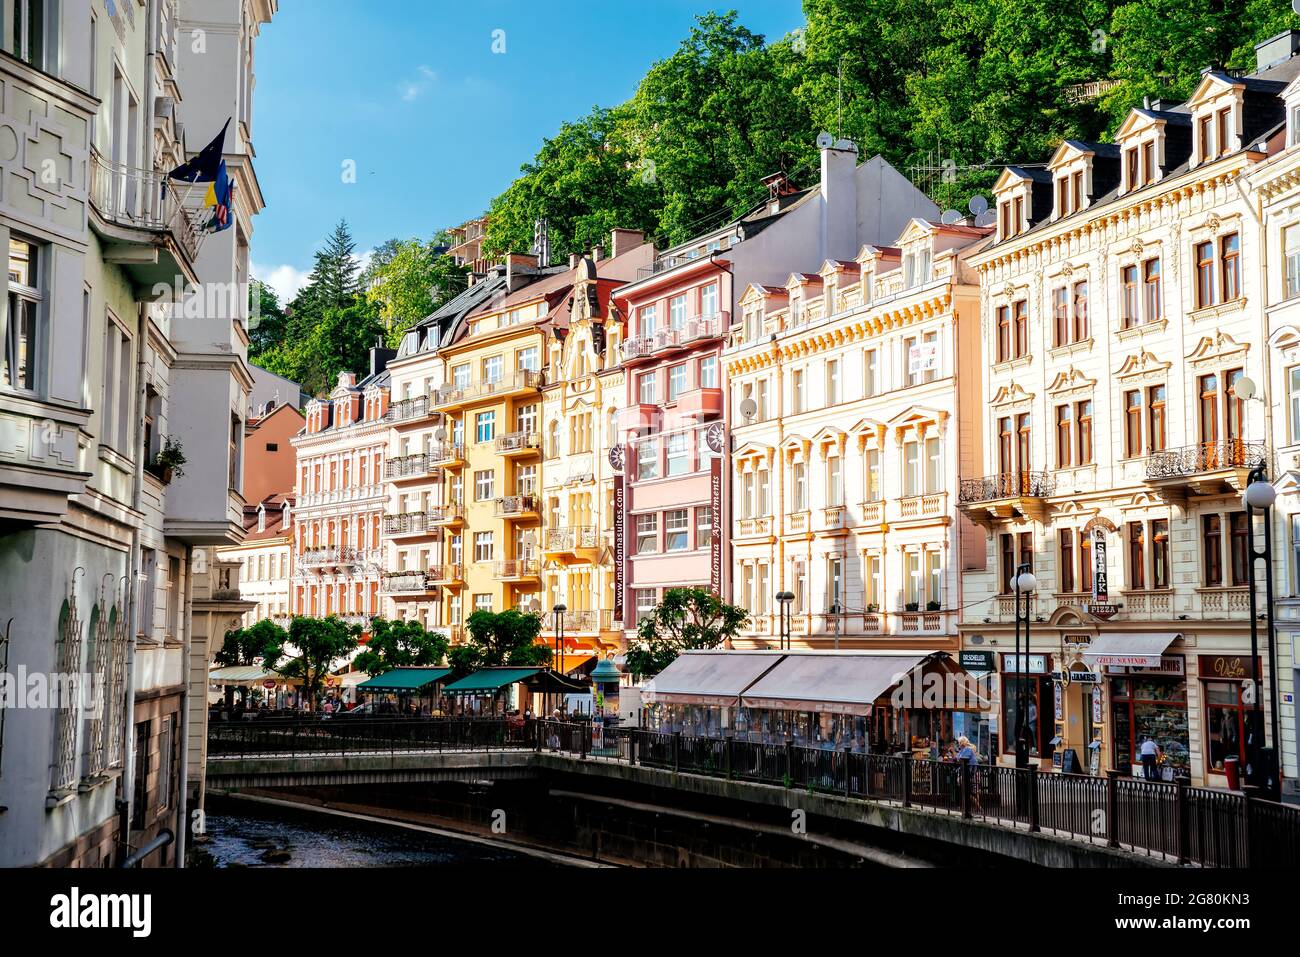 Karlovy Vary, Czech Republic - May 26, 2017: Colorful historic buildings in Karlovy Vary (Karlsbad) spa town Stock Photo